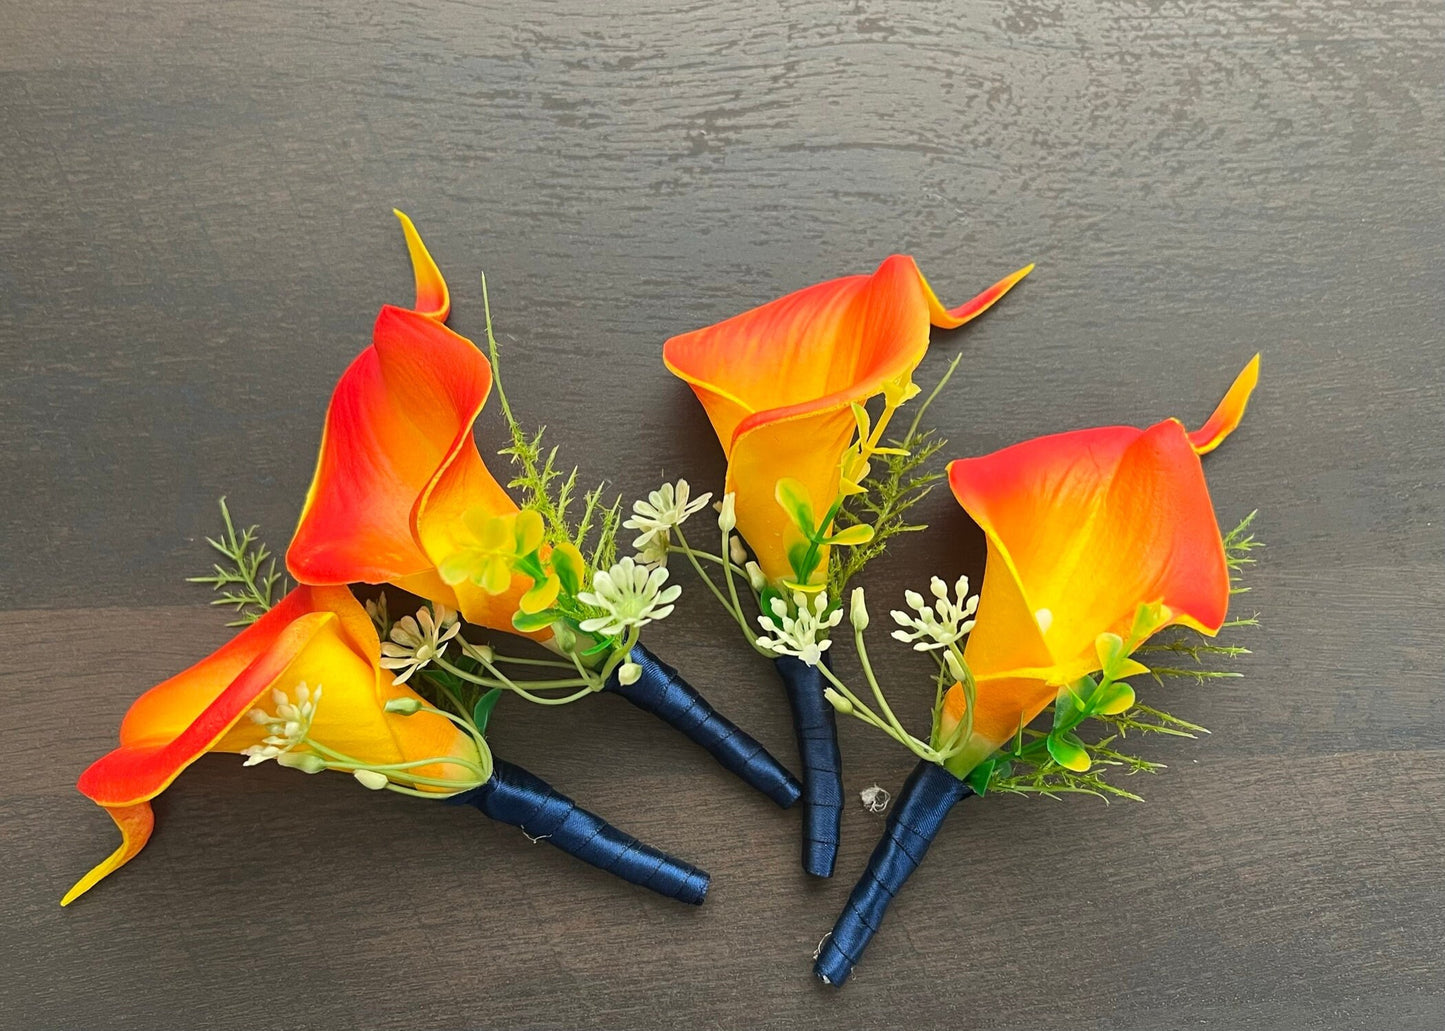 Luxurious Persimmon Tangerine Calla Lily Wedding Ensemble - Handcrafted Bridal Bouquet & Boutonniere Set